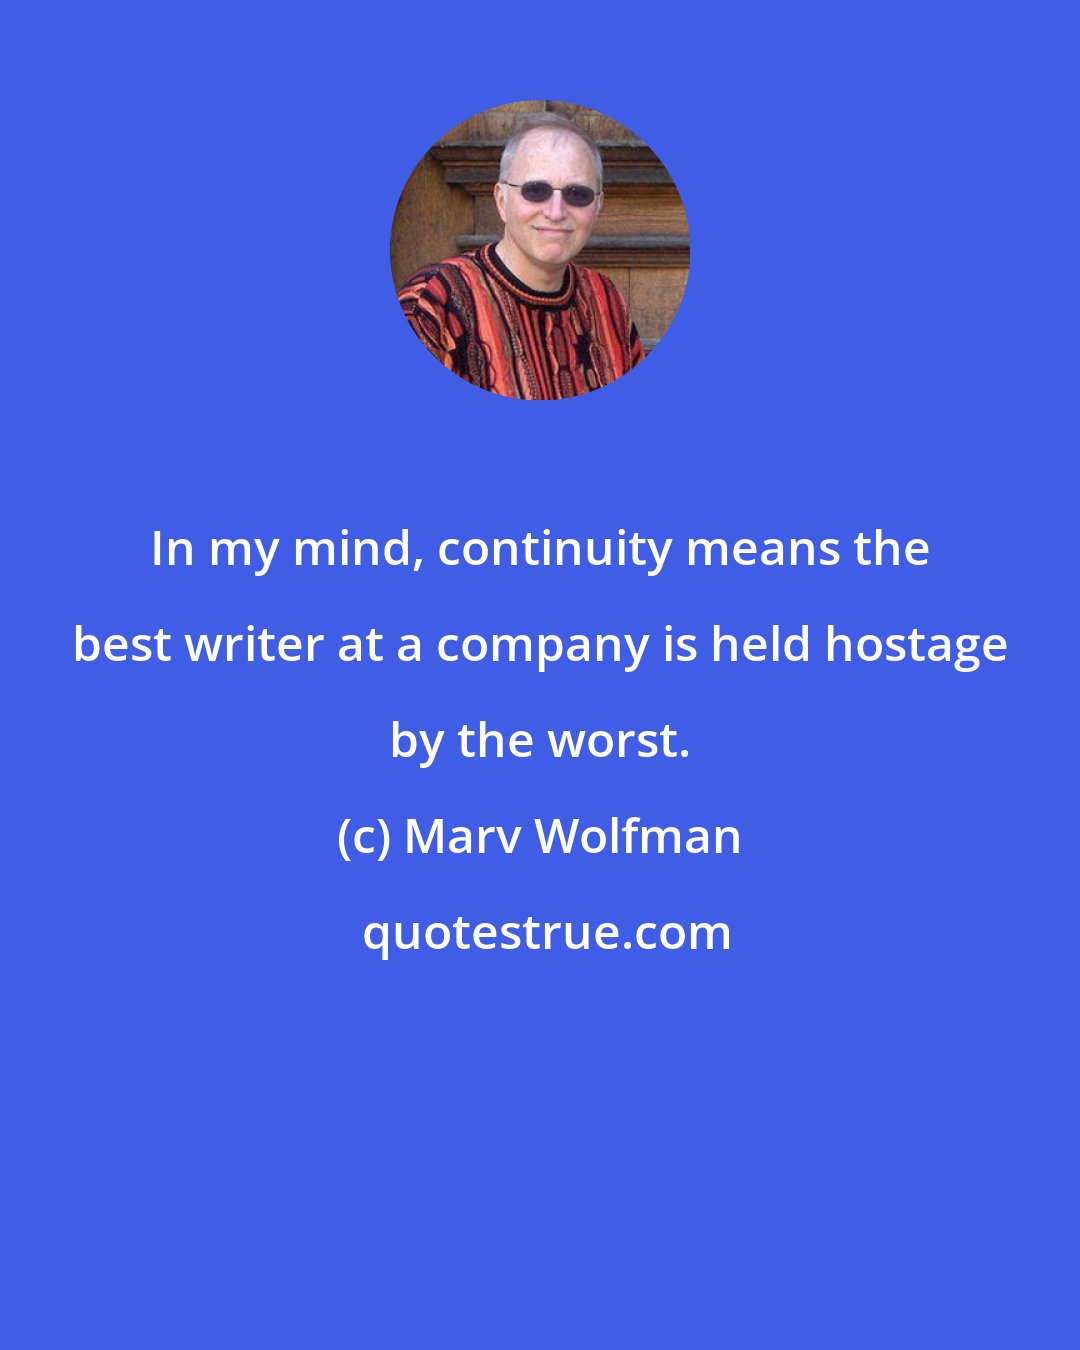 Marv Wolfman: In my mind, continuity means the best writer at a company is held hostage by the worst.